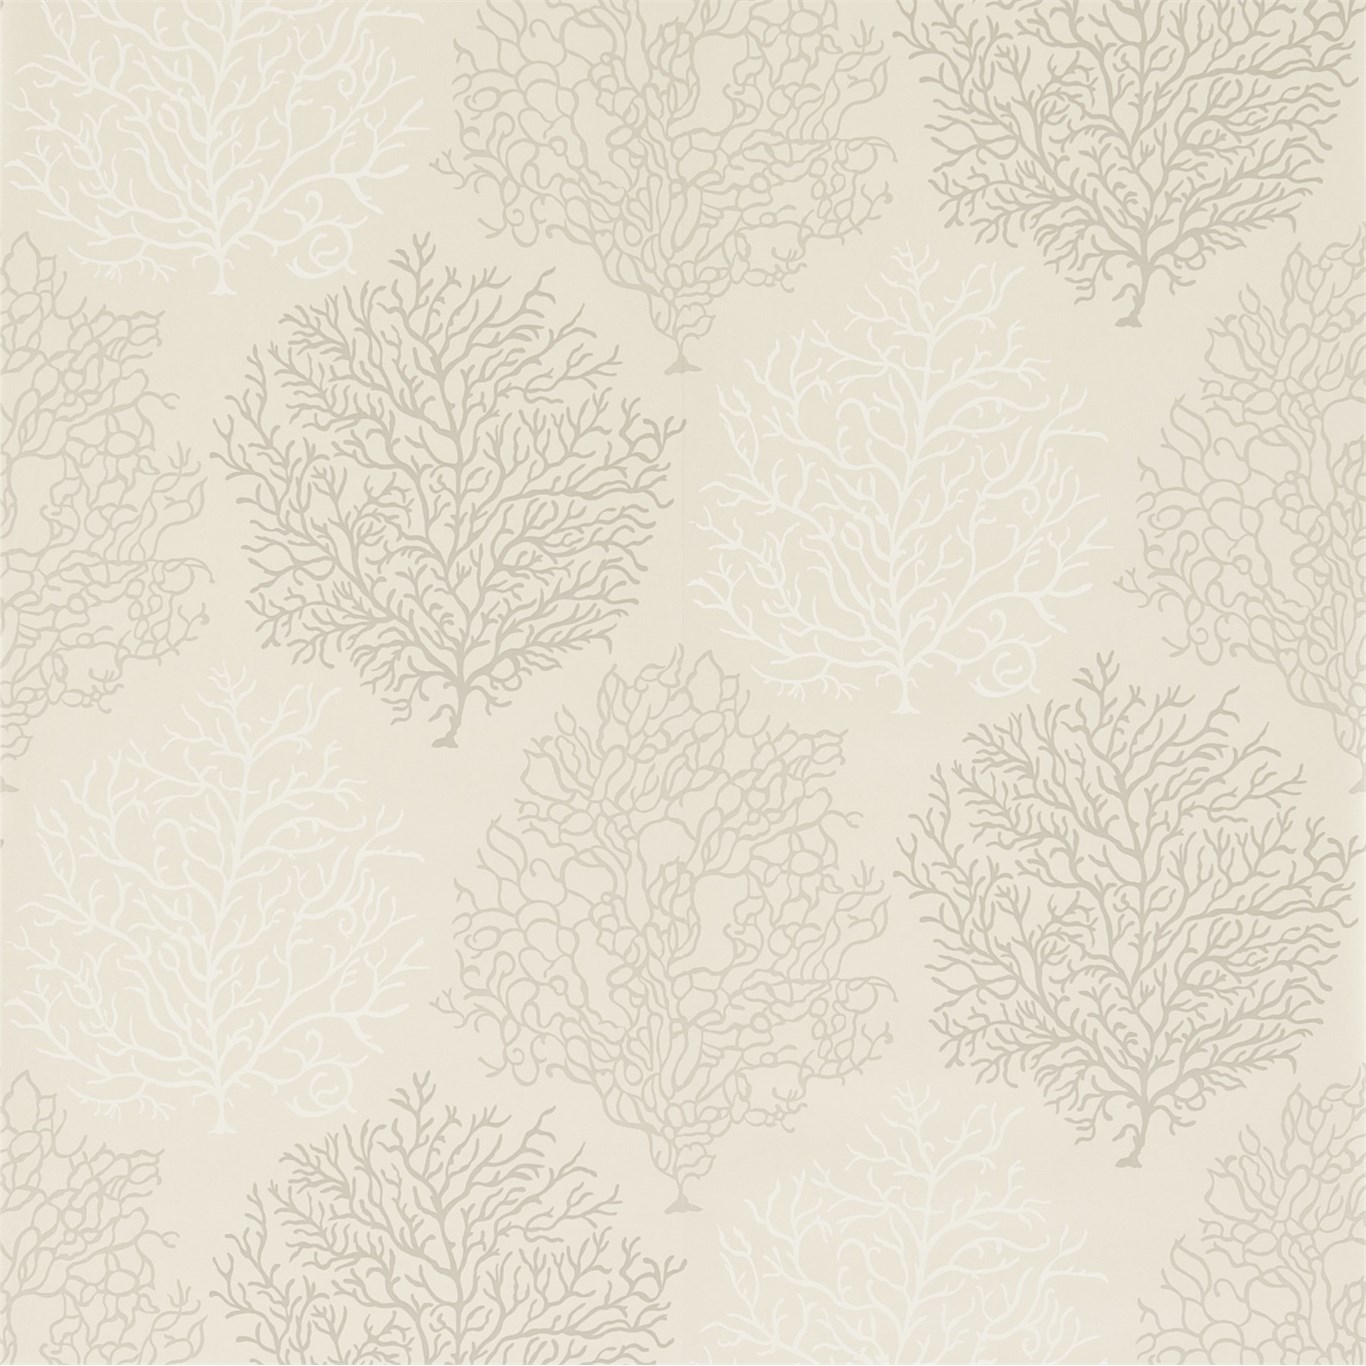 Wallpaper - Sanderson Voyage of Discovery Coral Reef Linen/Taupe